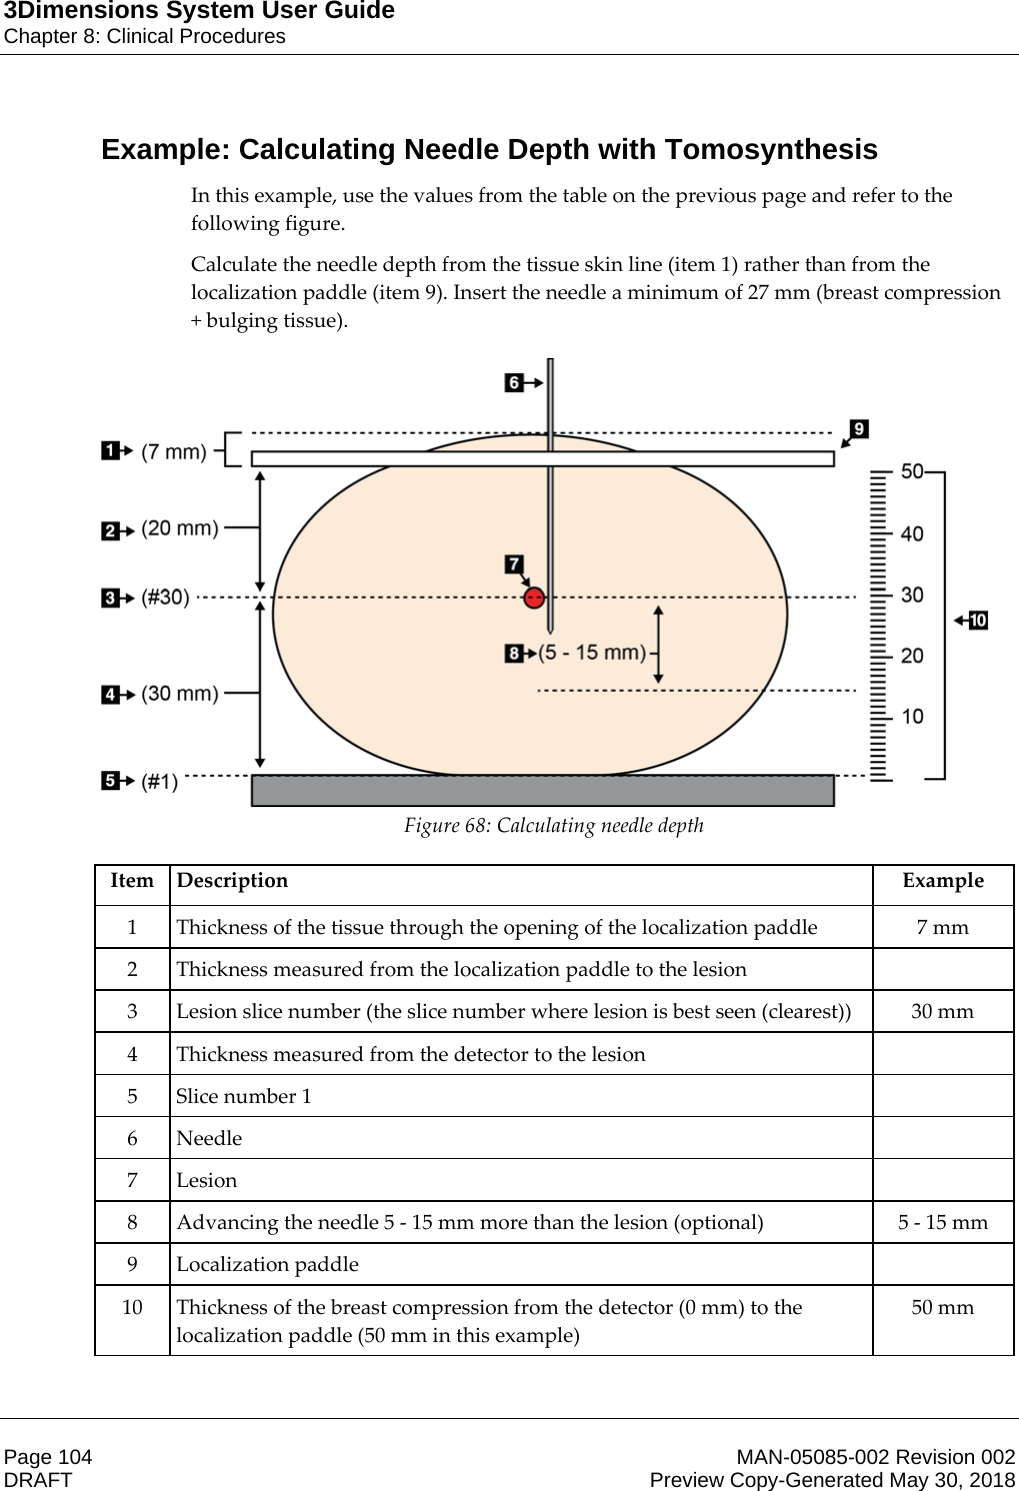 3Dimensions System User GuideChapter 8: Clinical ProceduresPage 104 MAN-05085-002 Revision 002  DRAFT Preview Copy-Generated May 30, 2018Example: Calculating Needle Depth with TomosynthesisIn this example, use the values from the table on the previous page and refer to the following figure. Calculate the needle depth from the tissue skin line (item 1) rather than from the localization paddle (item 9). Insert the needle a minimum of 27 mm (breast compression + bulging tissue).  Figure 68: Calculating needle depth    Item Description  Example 1  Thickness of the tissue through the opening of the localization paddle  7 mm 2  Thickness measured from the localization paddle to the lesion   3  Lesion slice number (the slice number where lesion is best seen (clearest))  30 mm 4  Thickness measured from the detector to the lesion   5 Slice number 1   6 Needle   7 Lesion   8  Advancing the needle 5 - 15 mm more than the lesion (optional)  5 - 15 mm 9 Localization paddle   10  Thickness of the breast compression from the detector (0 mm) to the localization paddle (50 mm in this example) 50 mm    